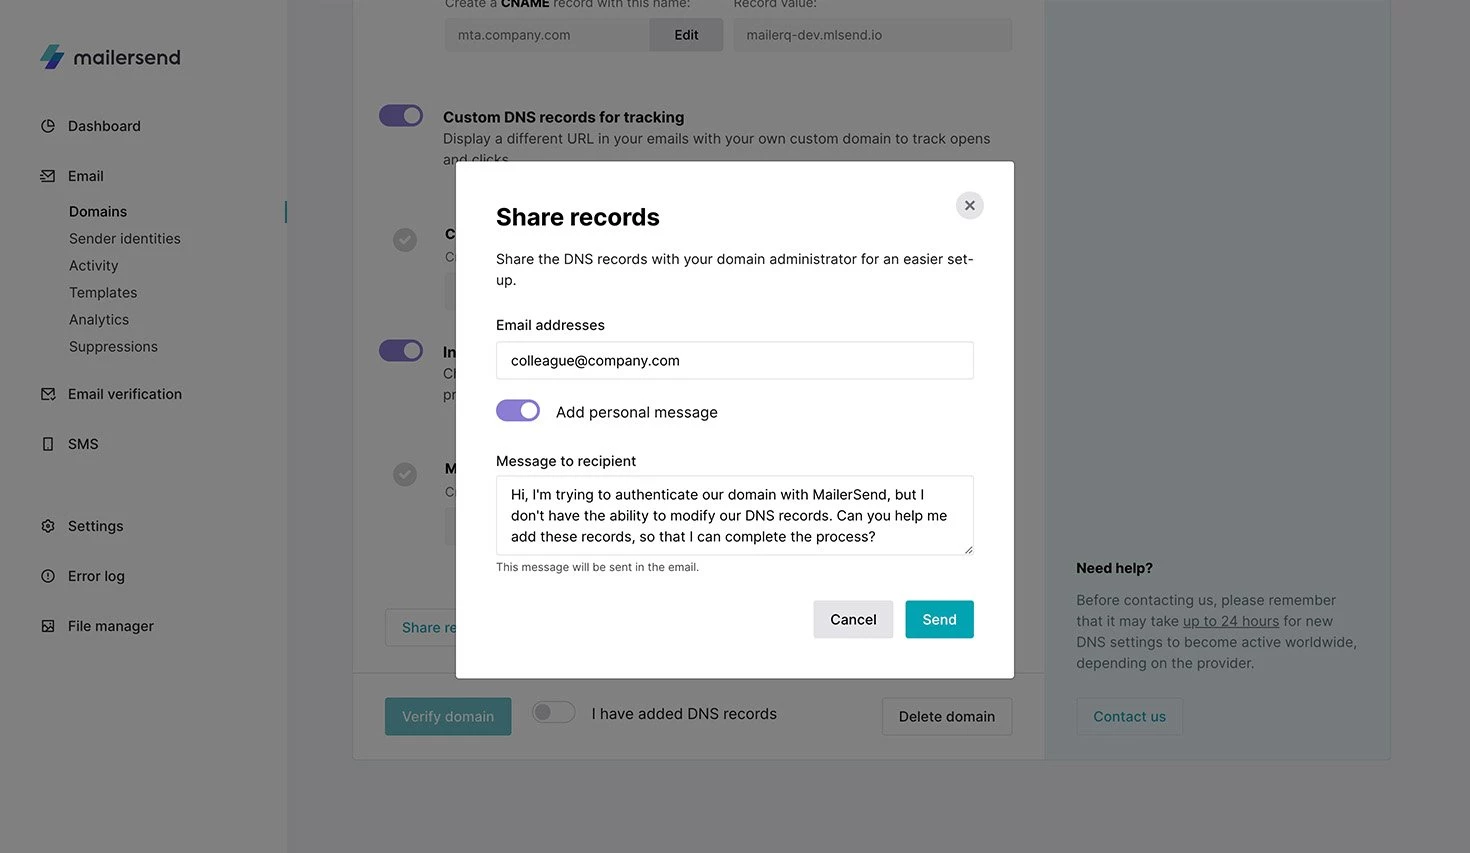 Share the records to your colleagues